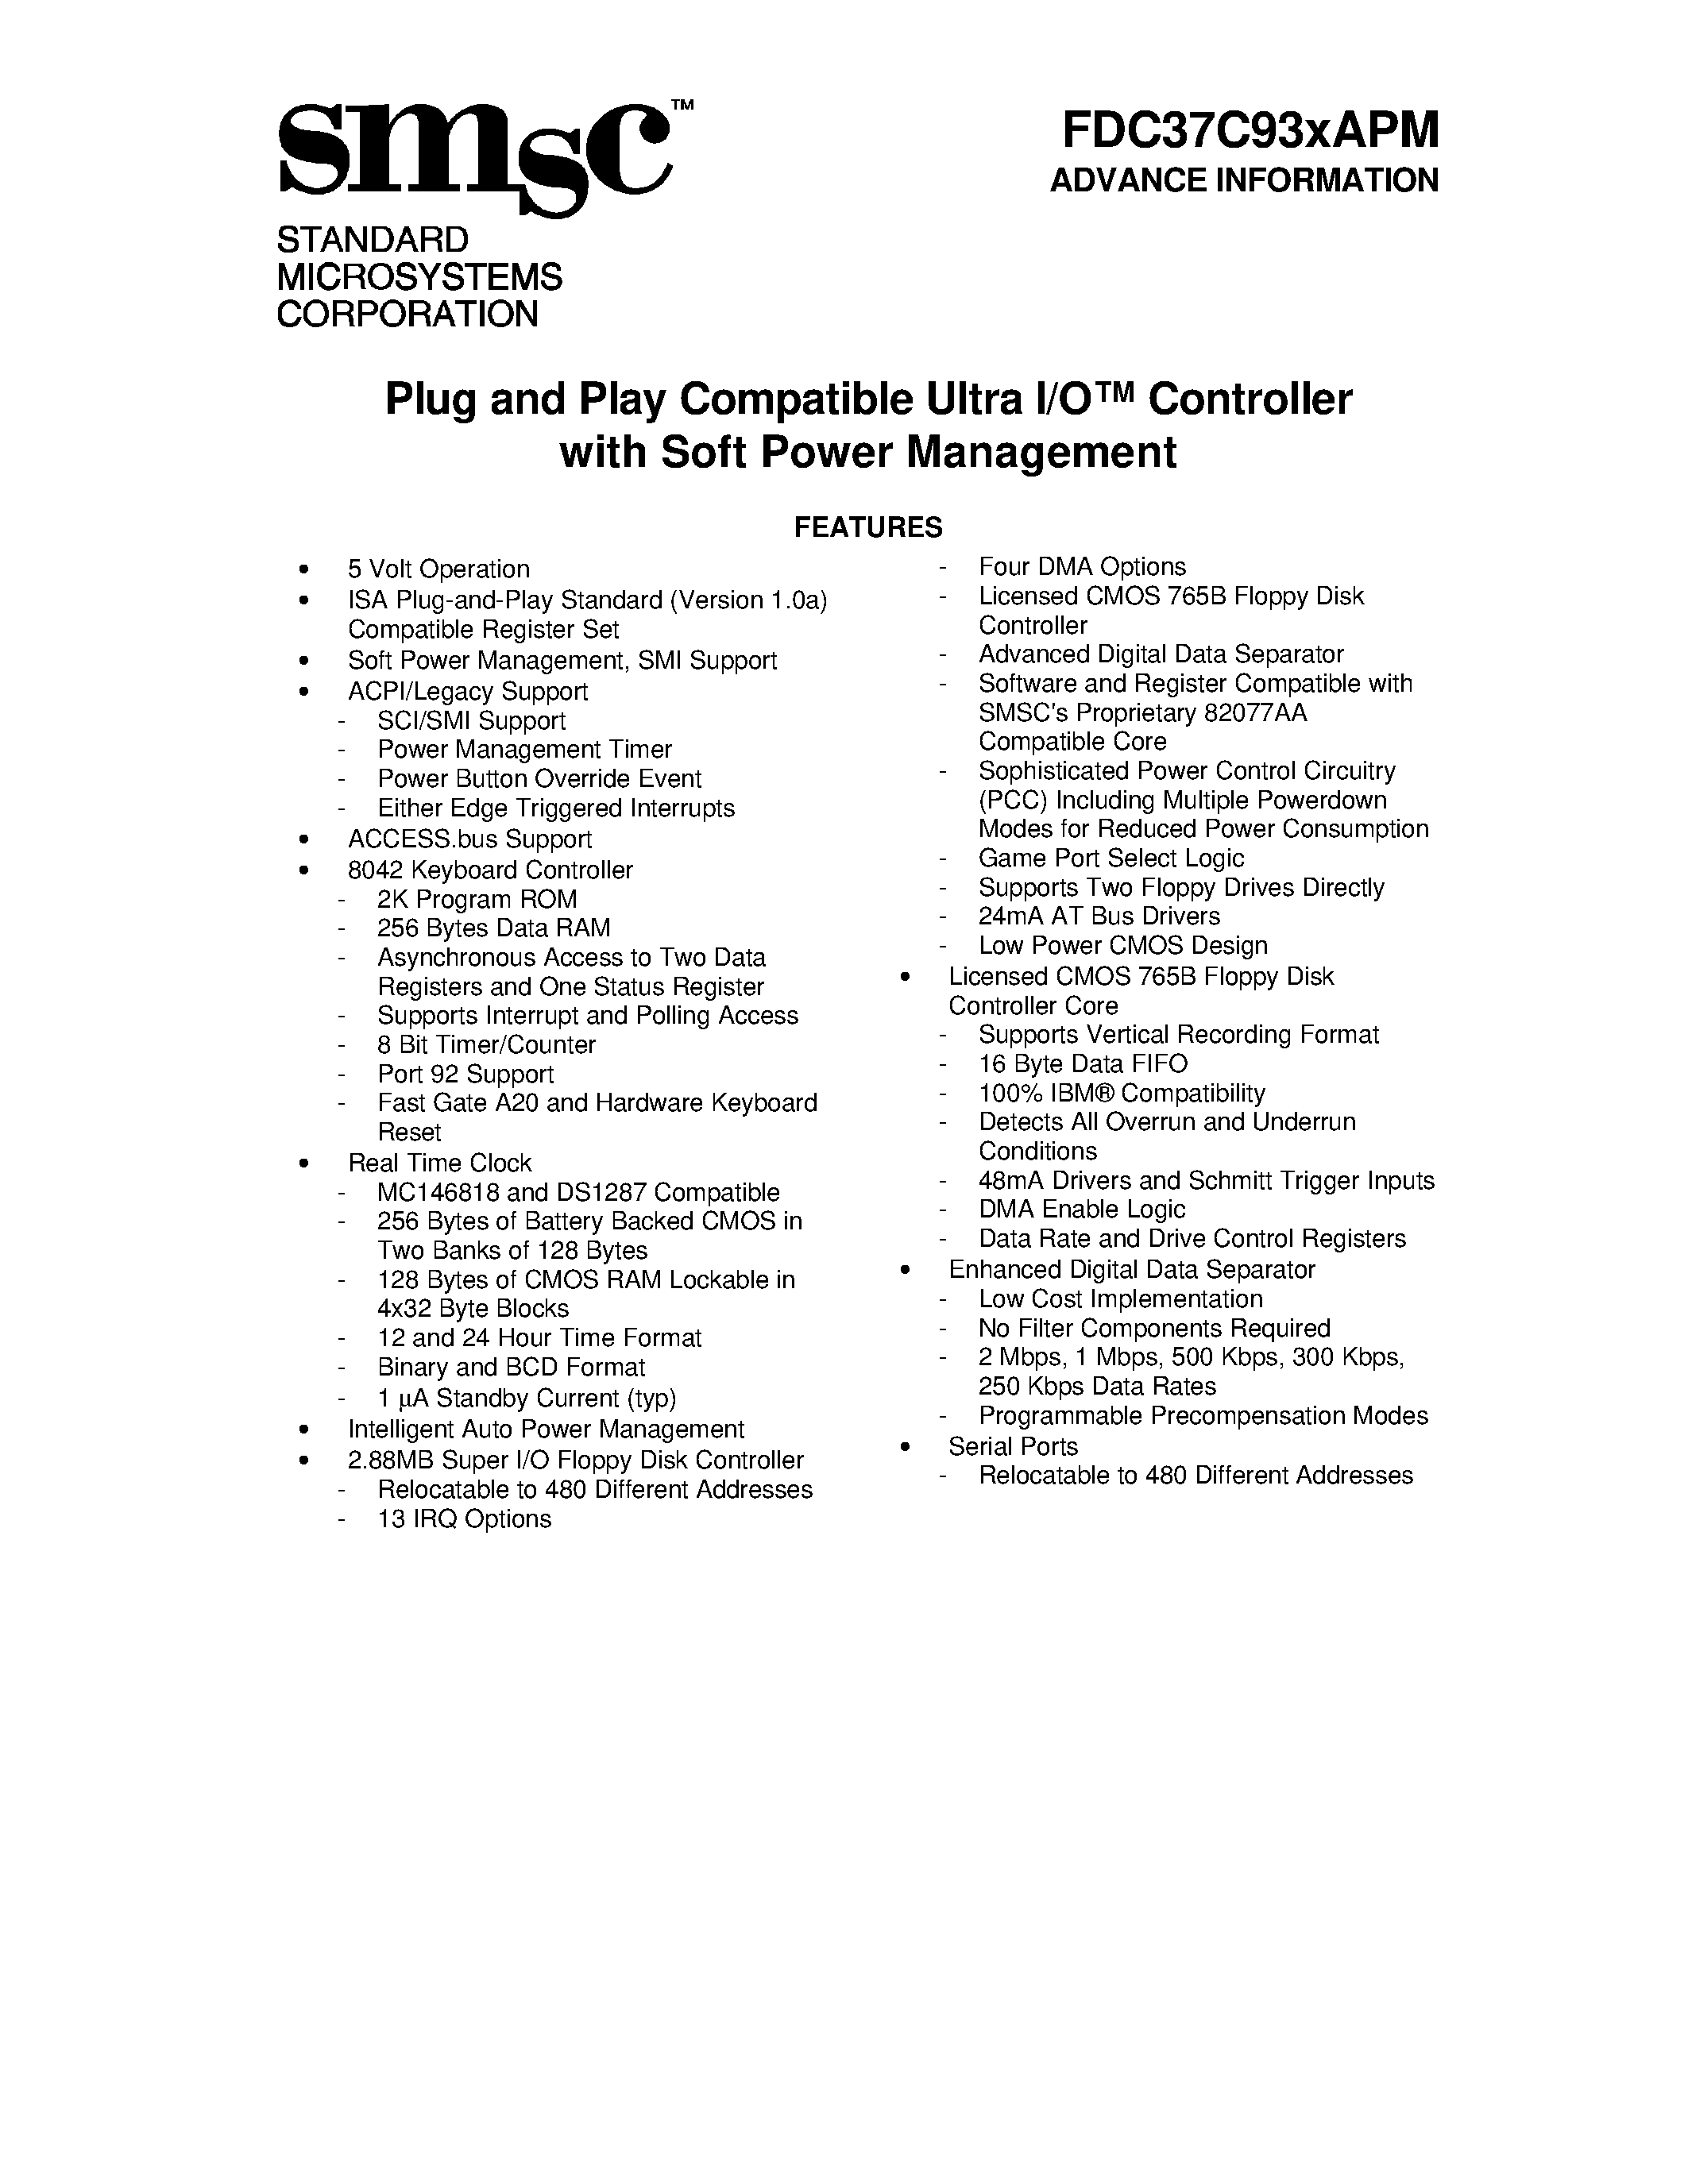 Datasheet FDC37C93XAPM - Plug and Play Compatible Ultra I/O Controller with Soft Power Management page 1